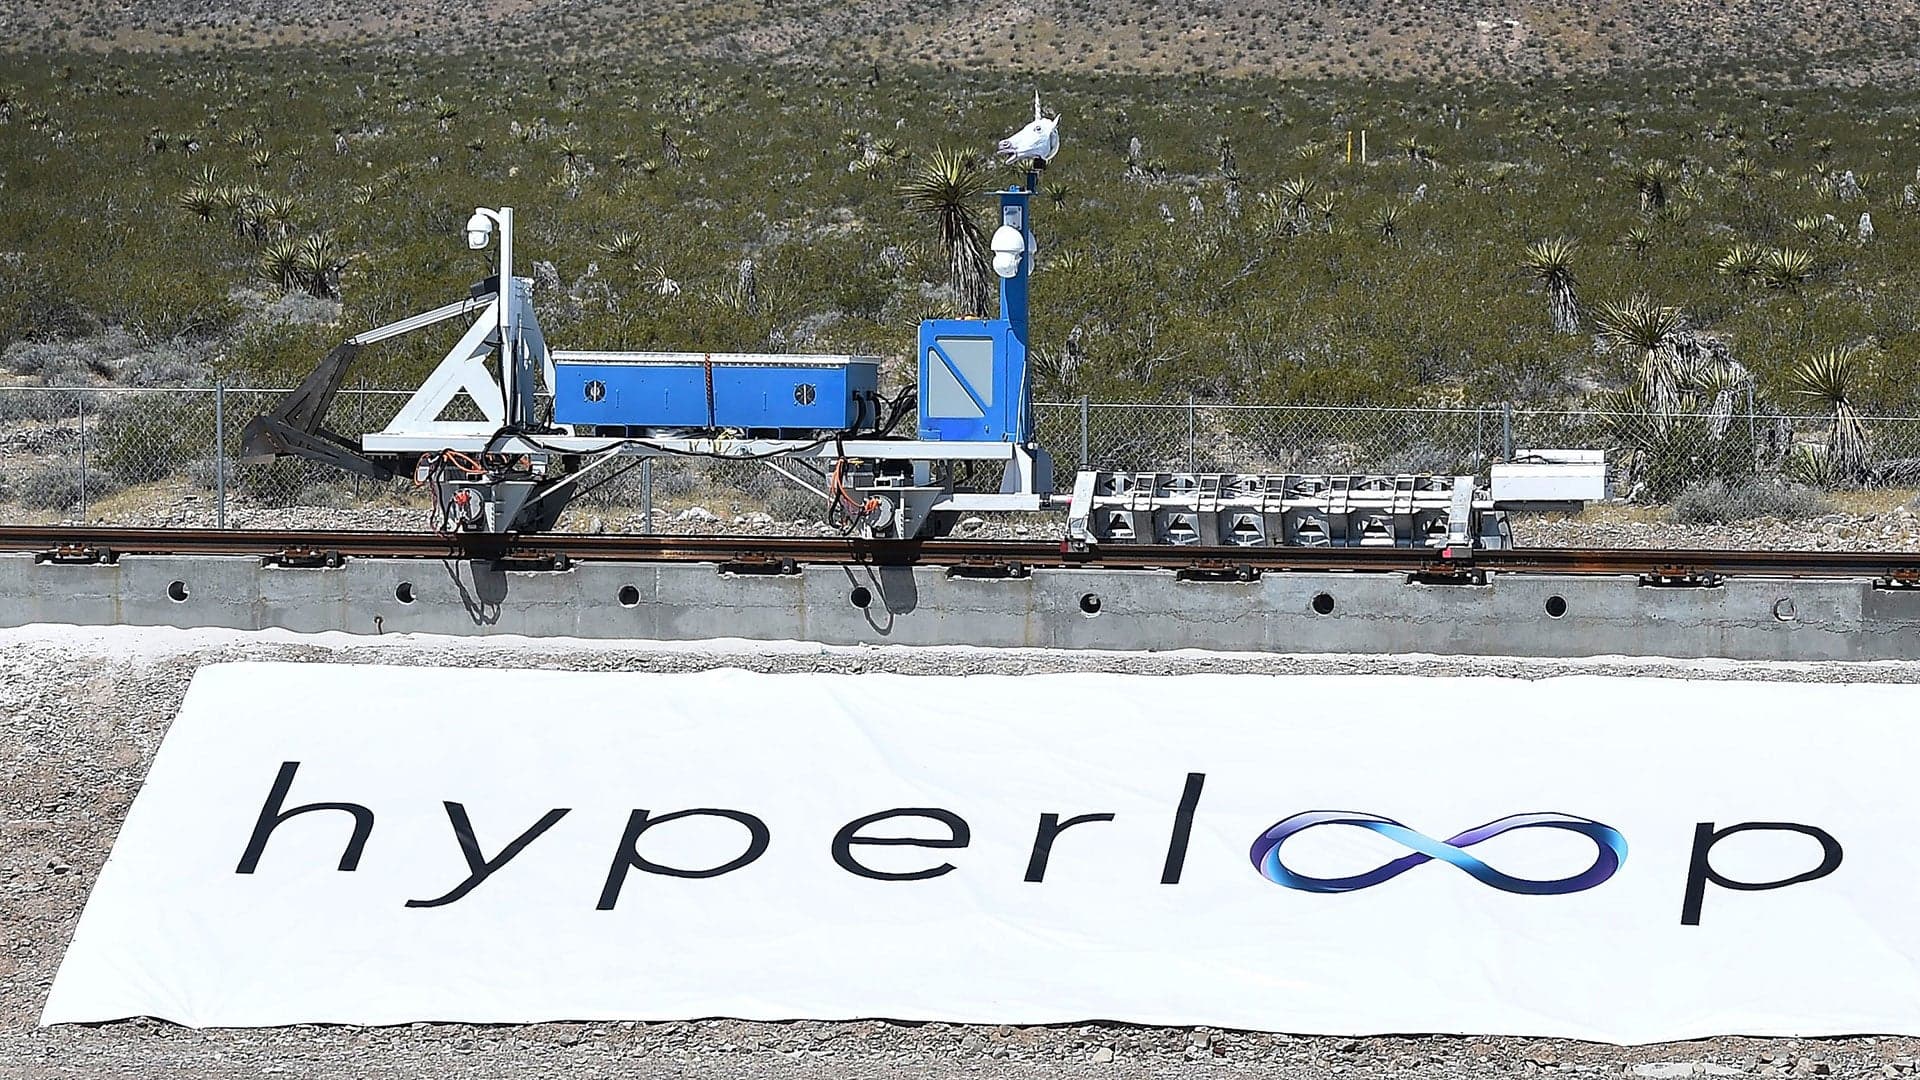 The Hyperloop Just Completed Its First Trial Run…Kinda